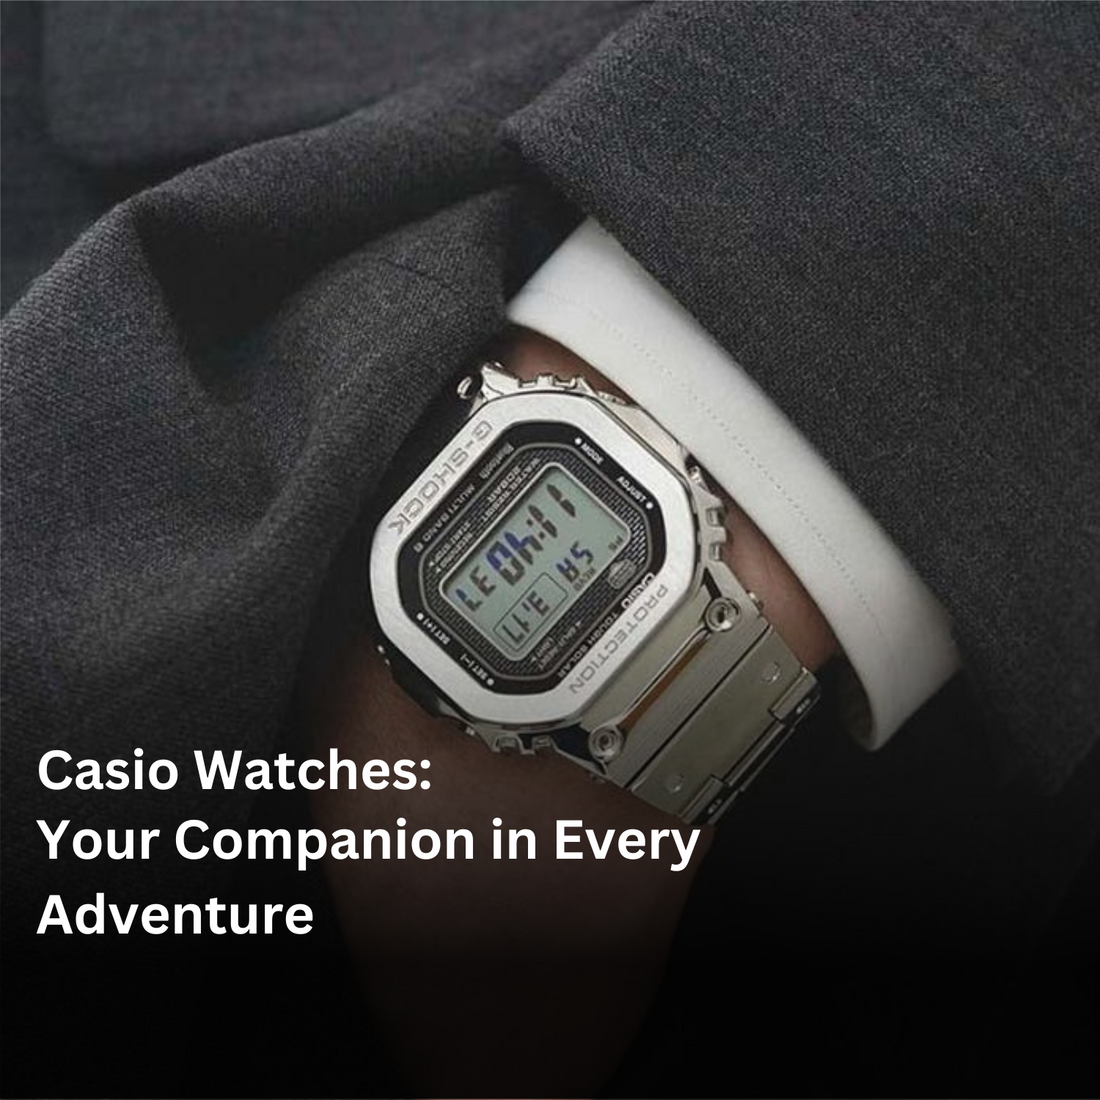 Casio Watches: Your Companion in Every Adventure